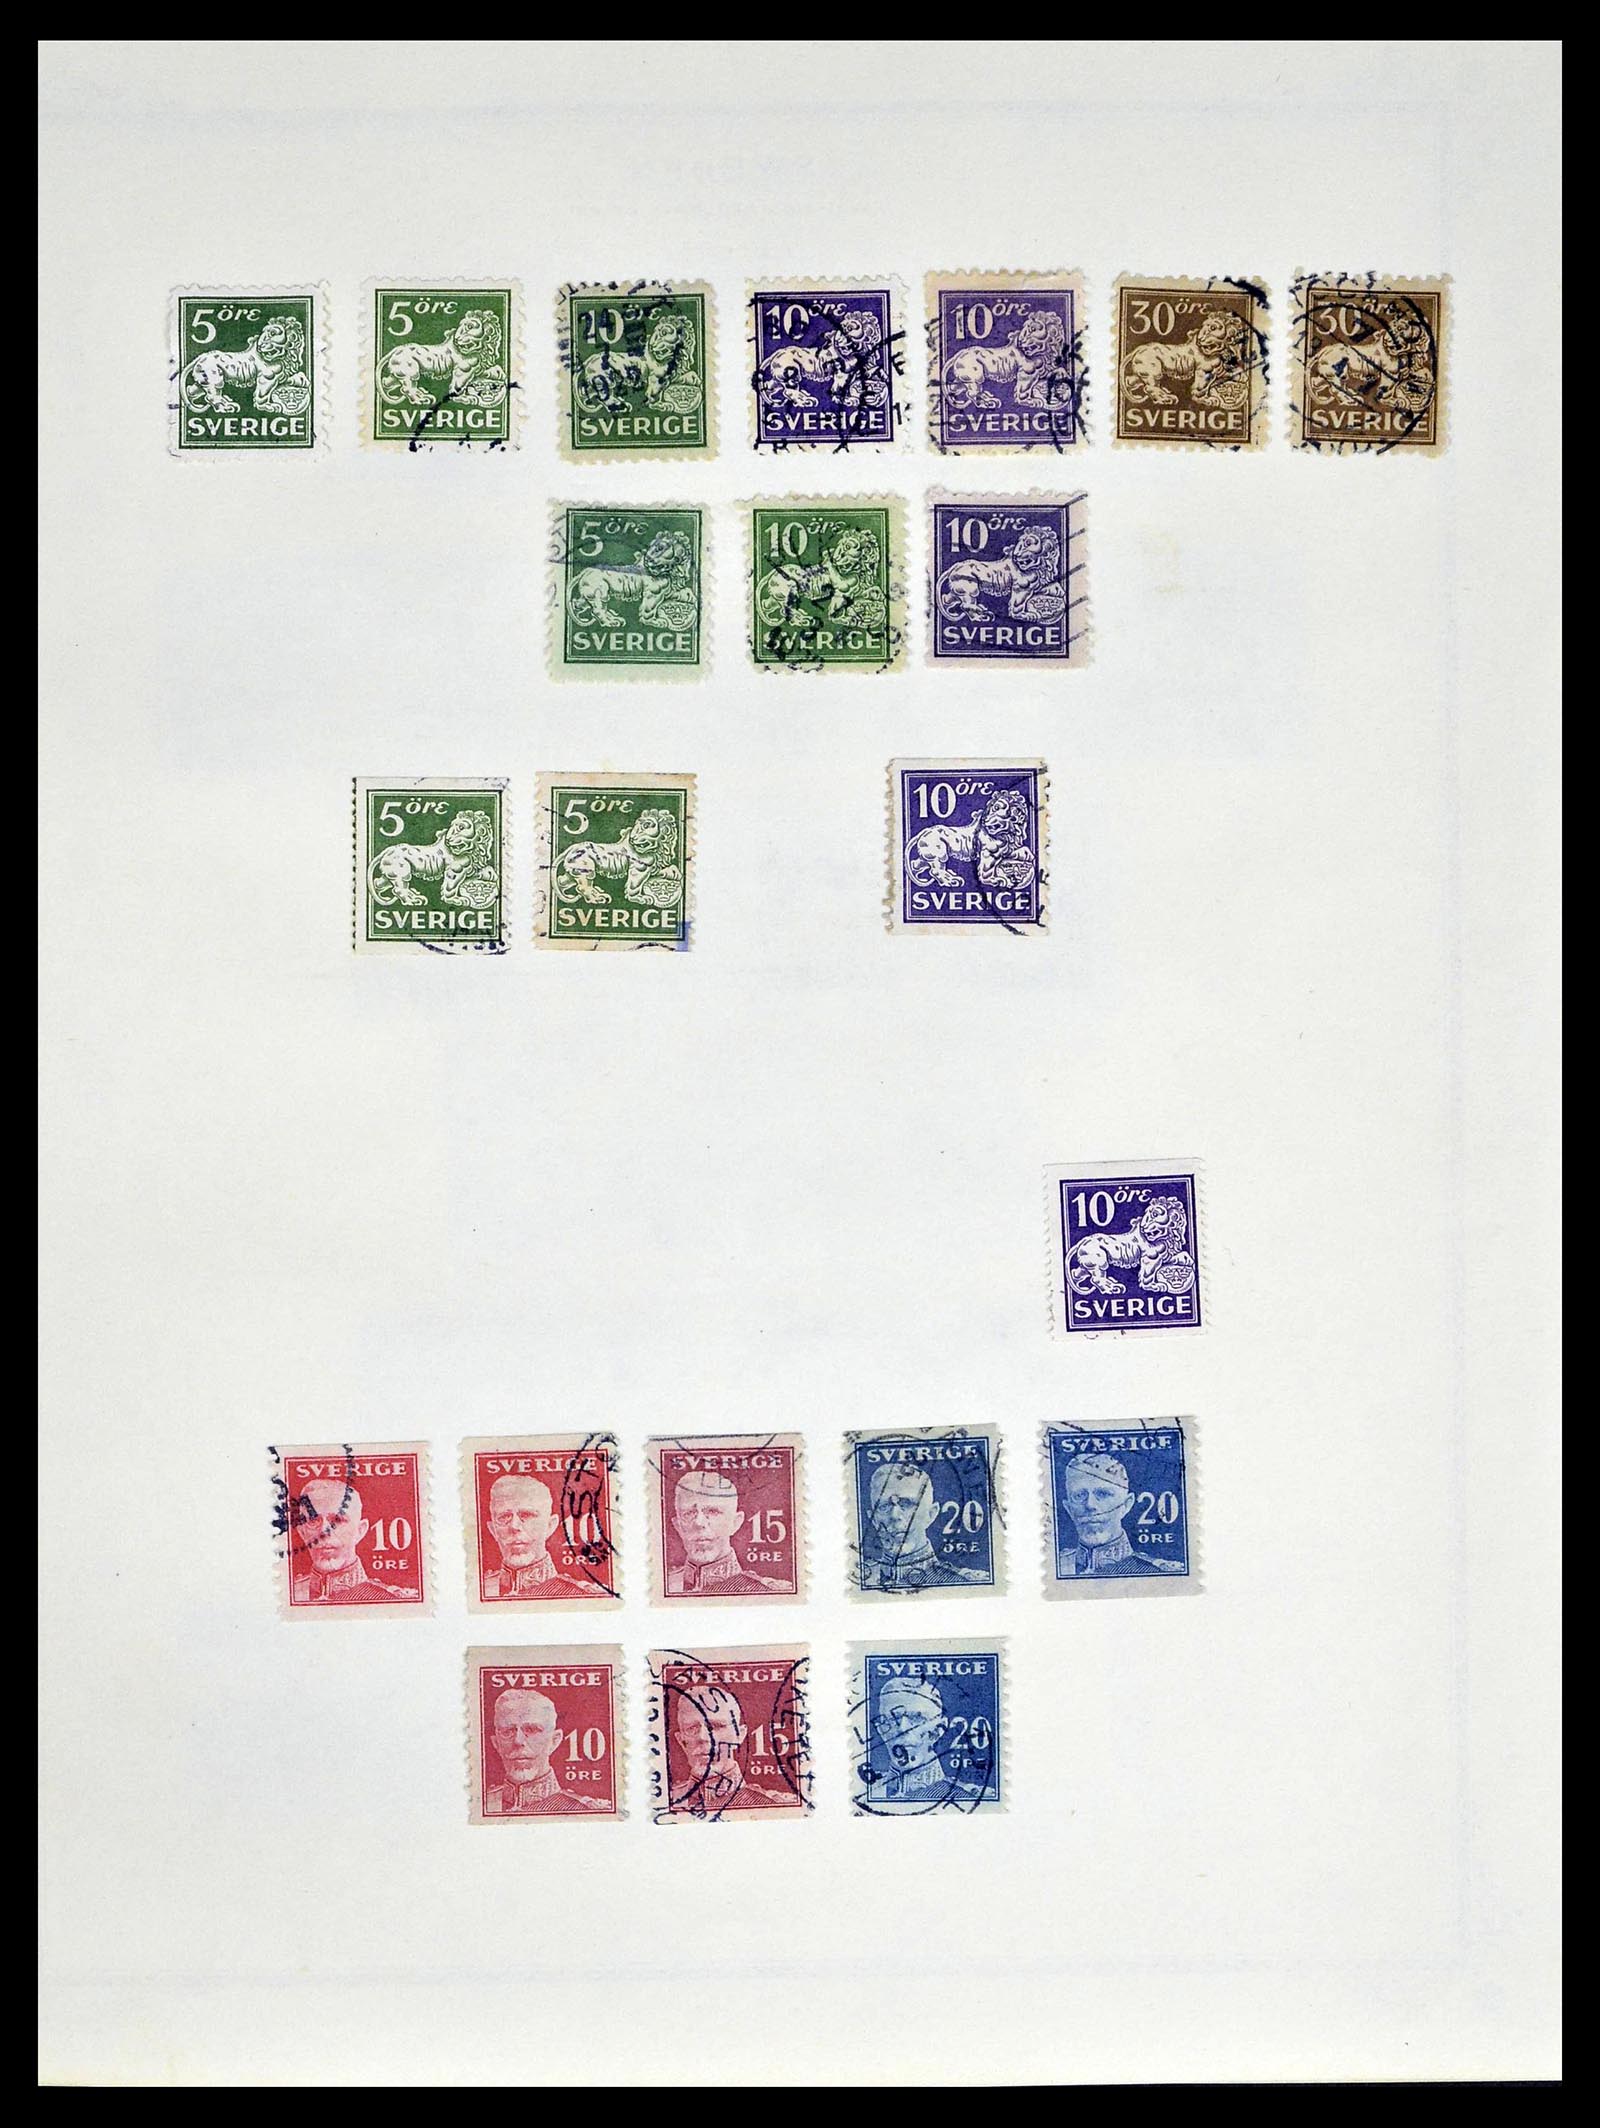 39179 0009 - Stamp collection 39179 Sweden 1855-1997.